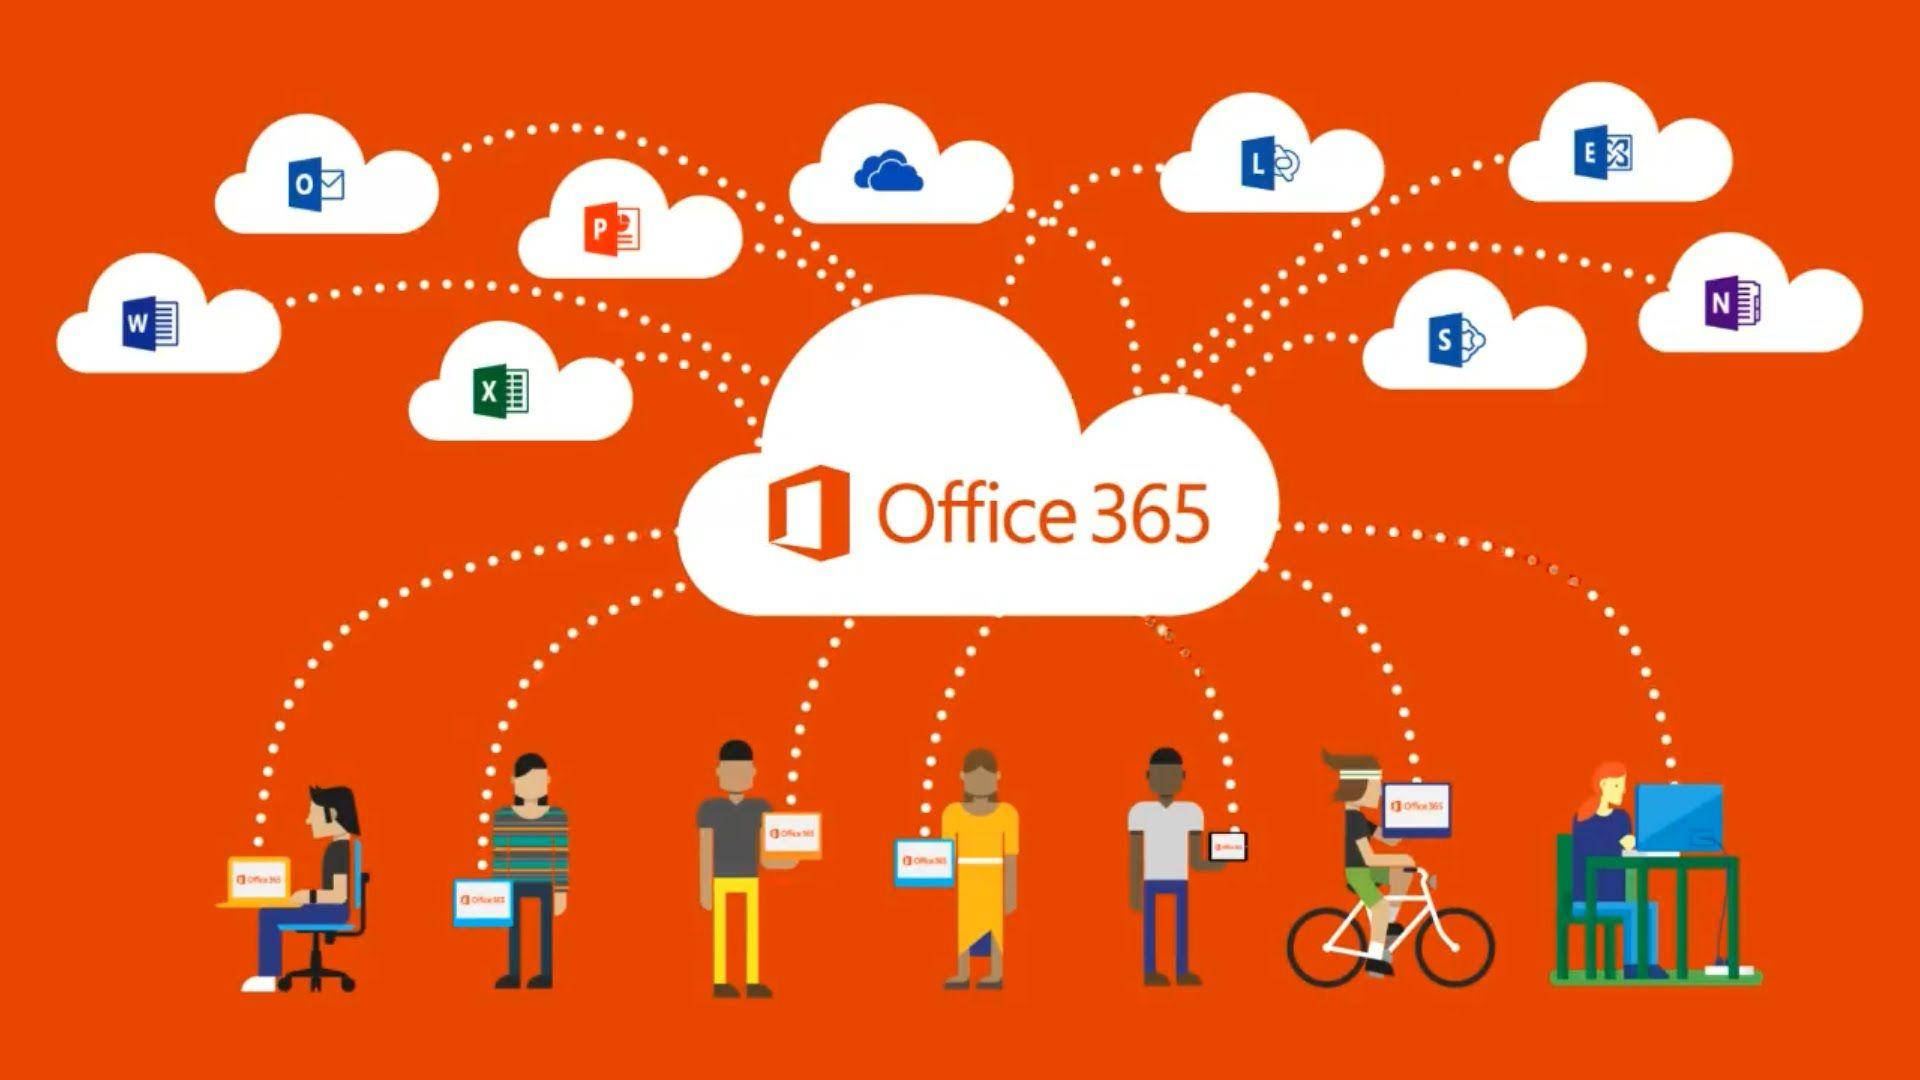 Office 365 App Connection Wallpaper